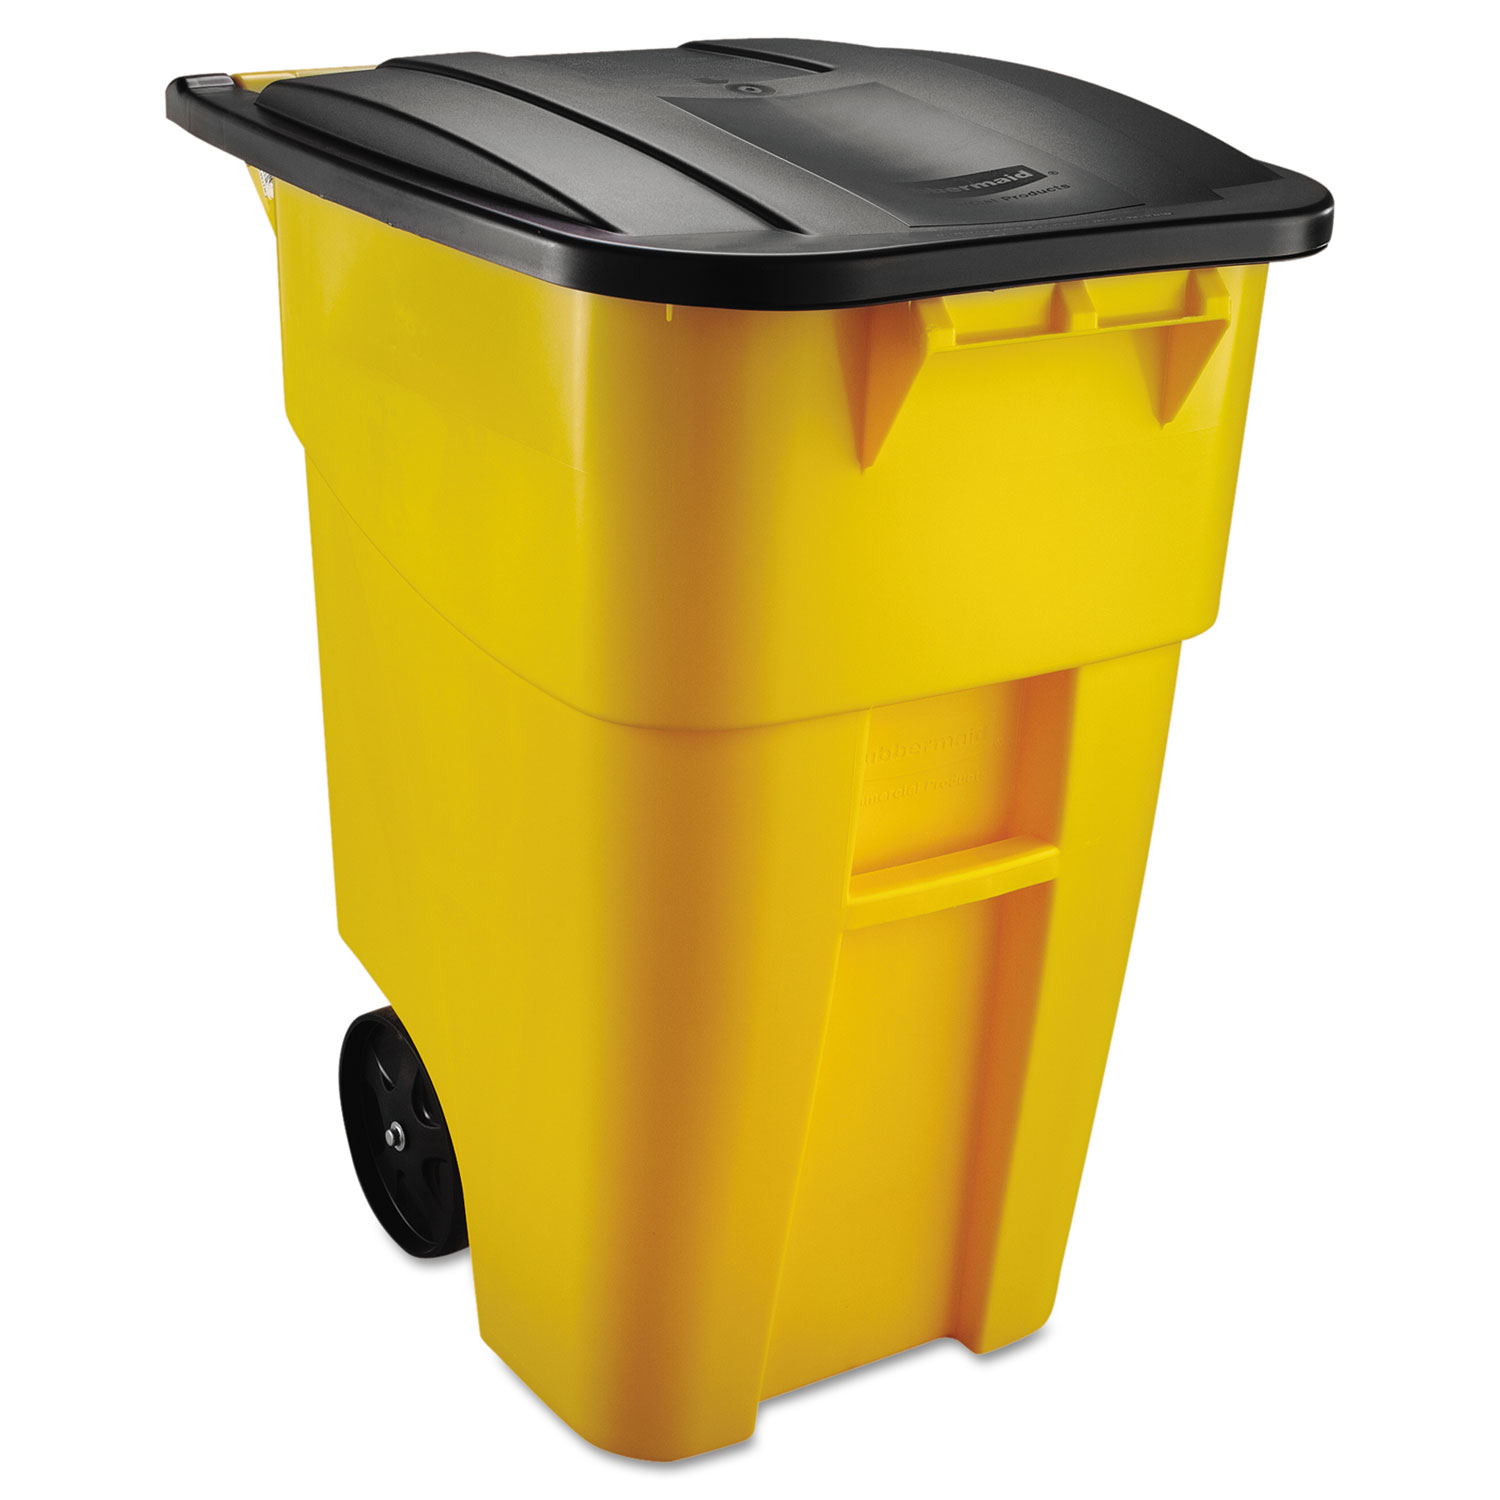  Rubbermaid Commercial 9W2700YEL Brute Rollout Container, Square, Plastic, 50 gal, Yellow (RCP9W27YEL) 